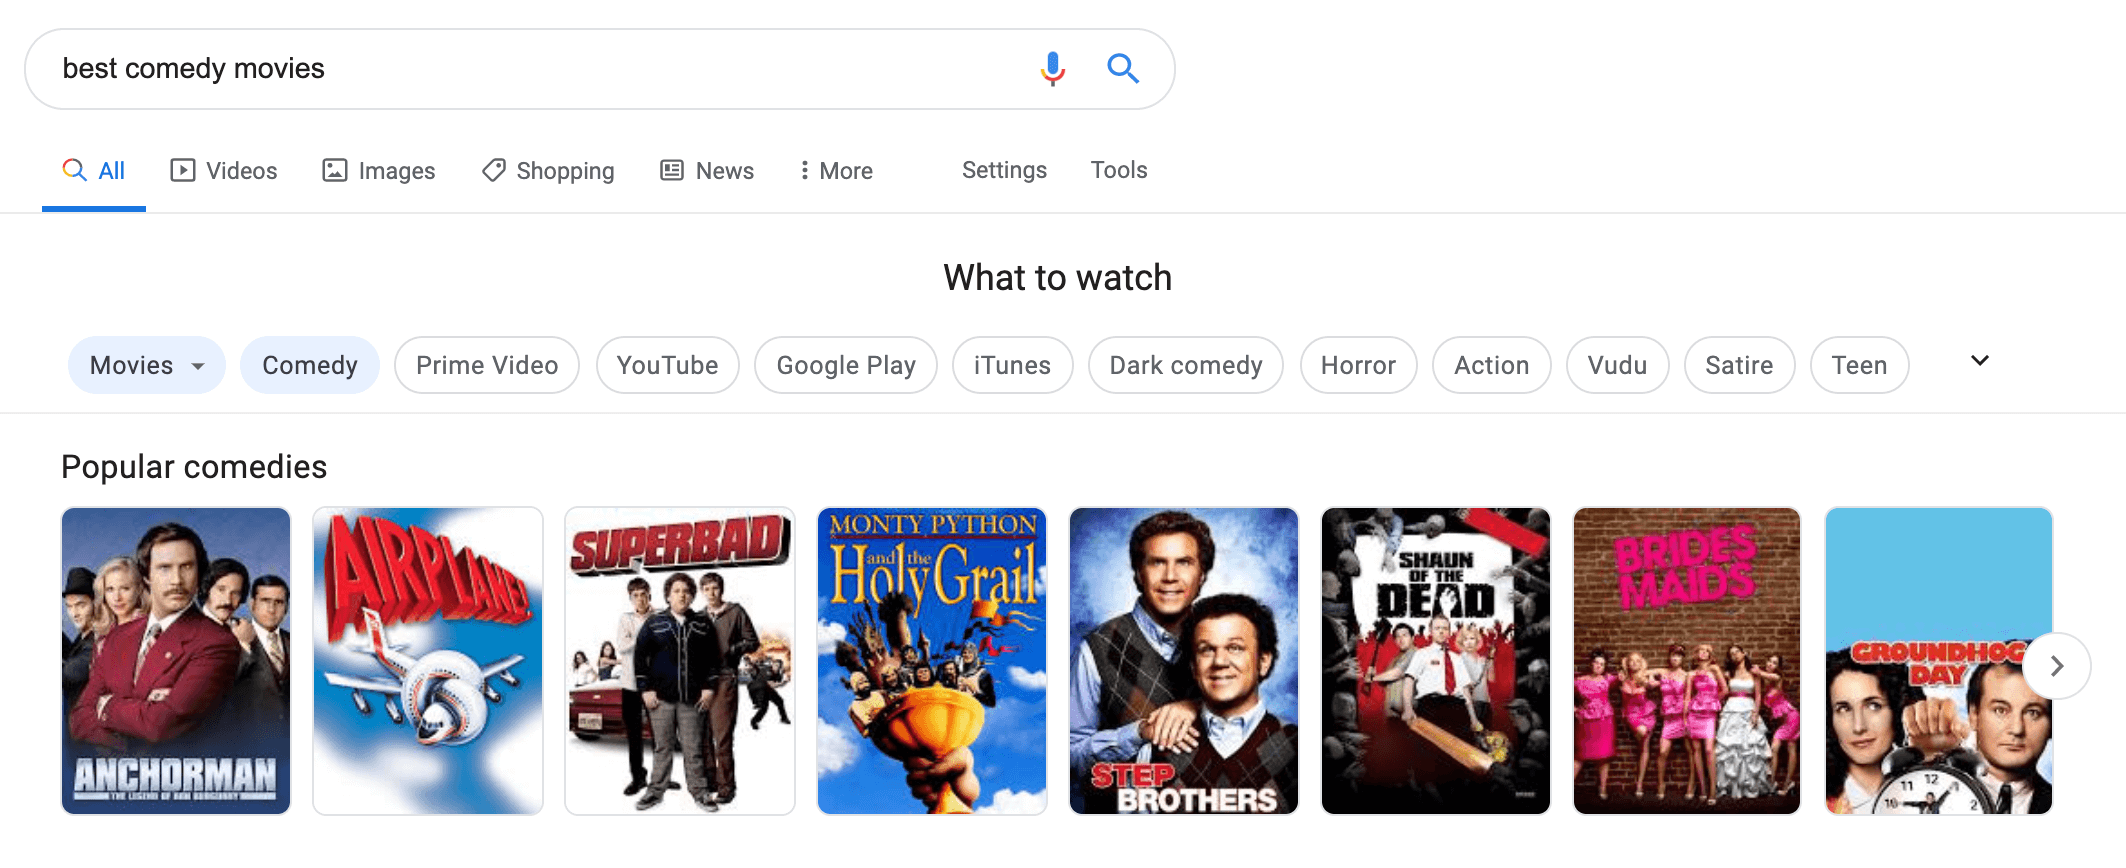 best comedy movies google entities visual search